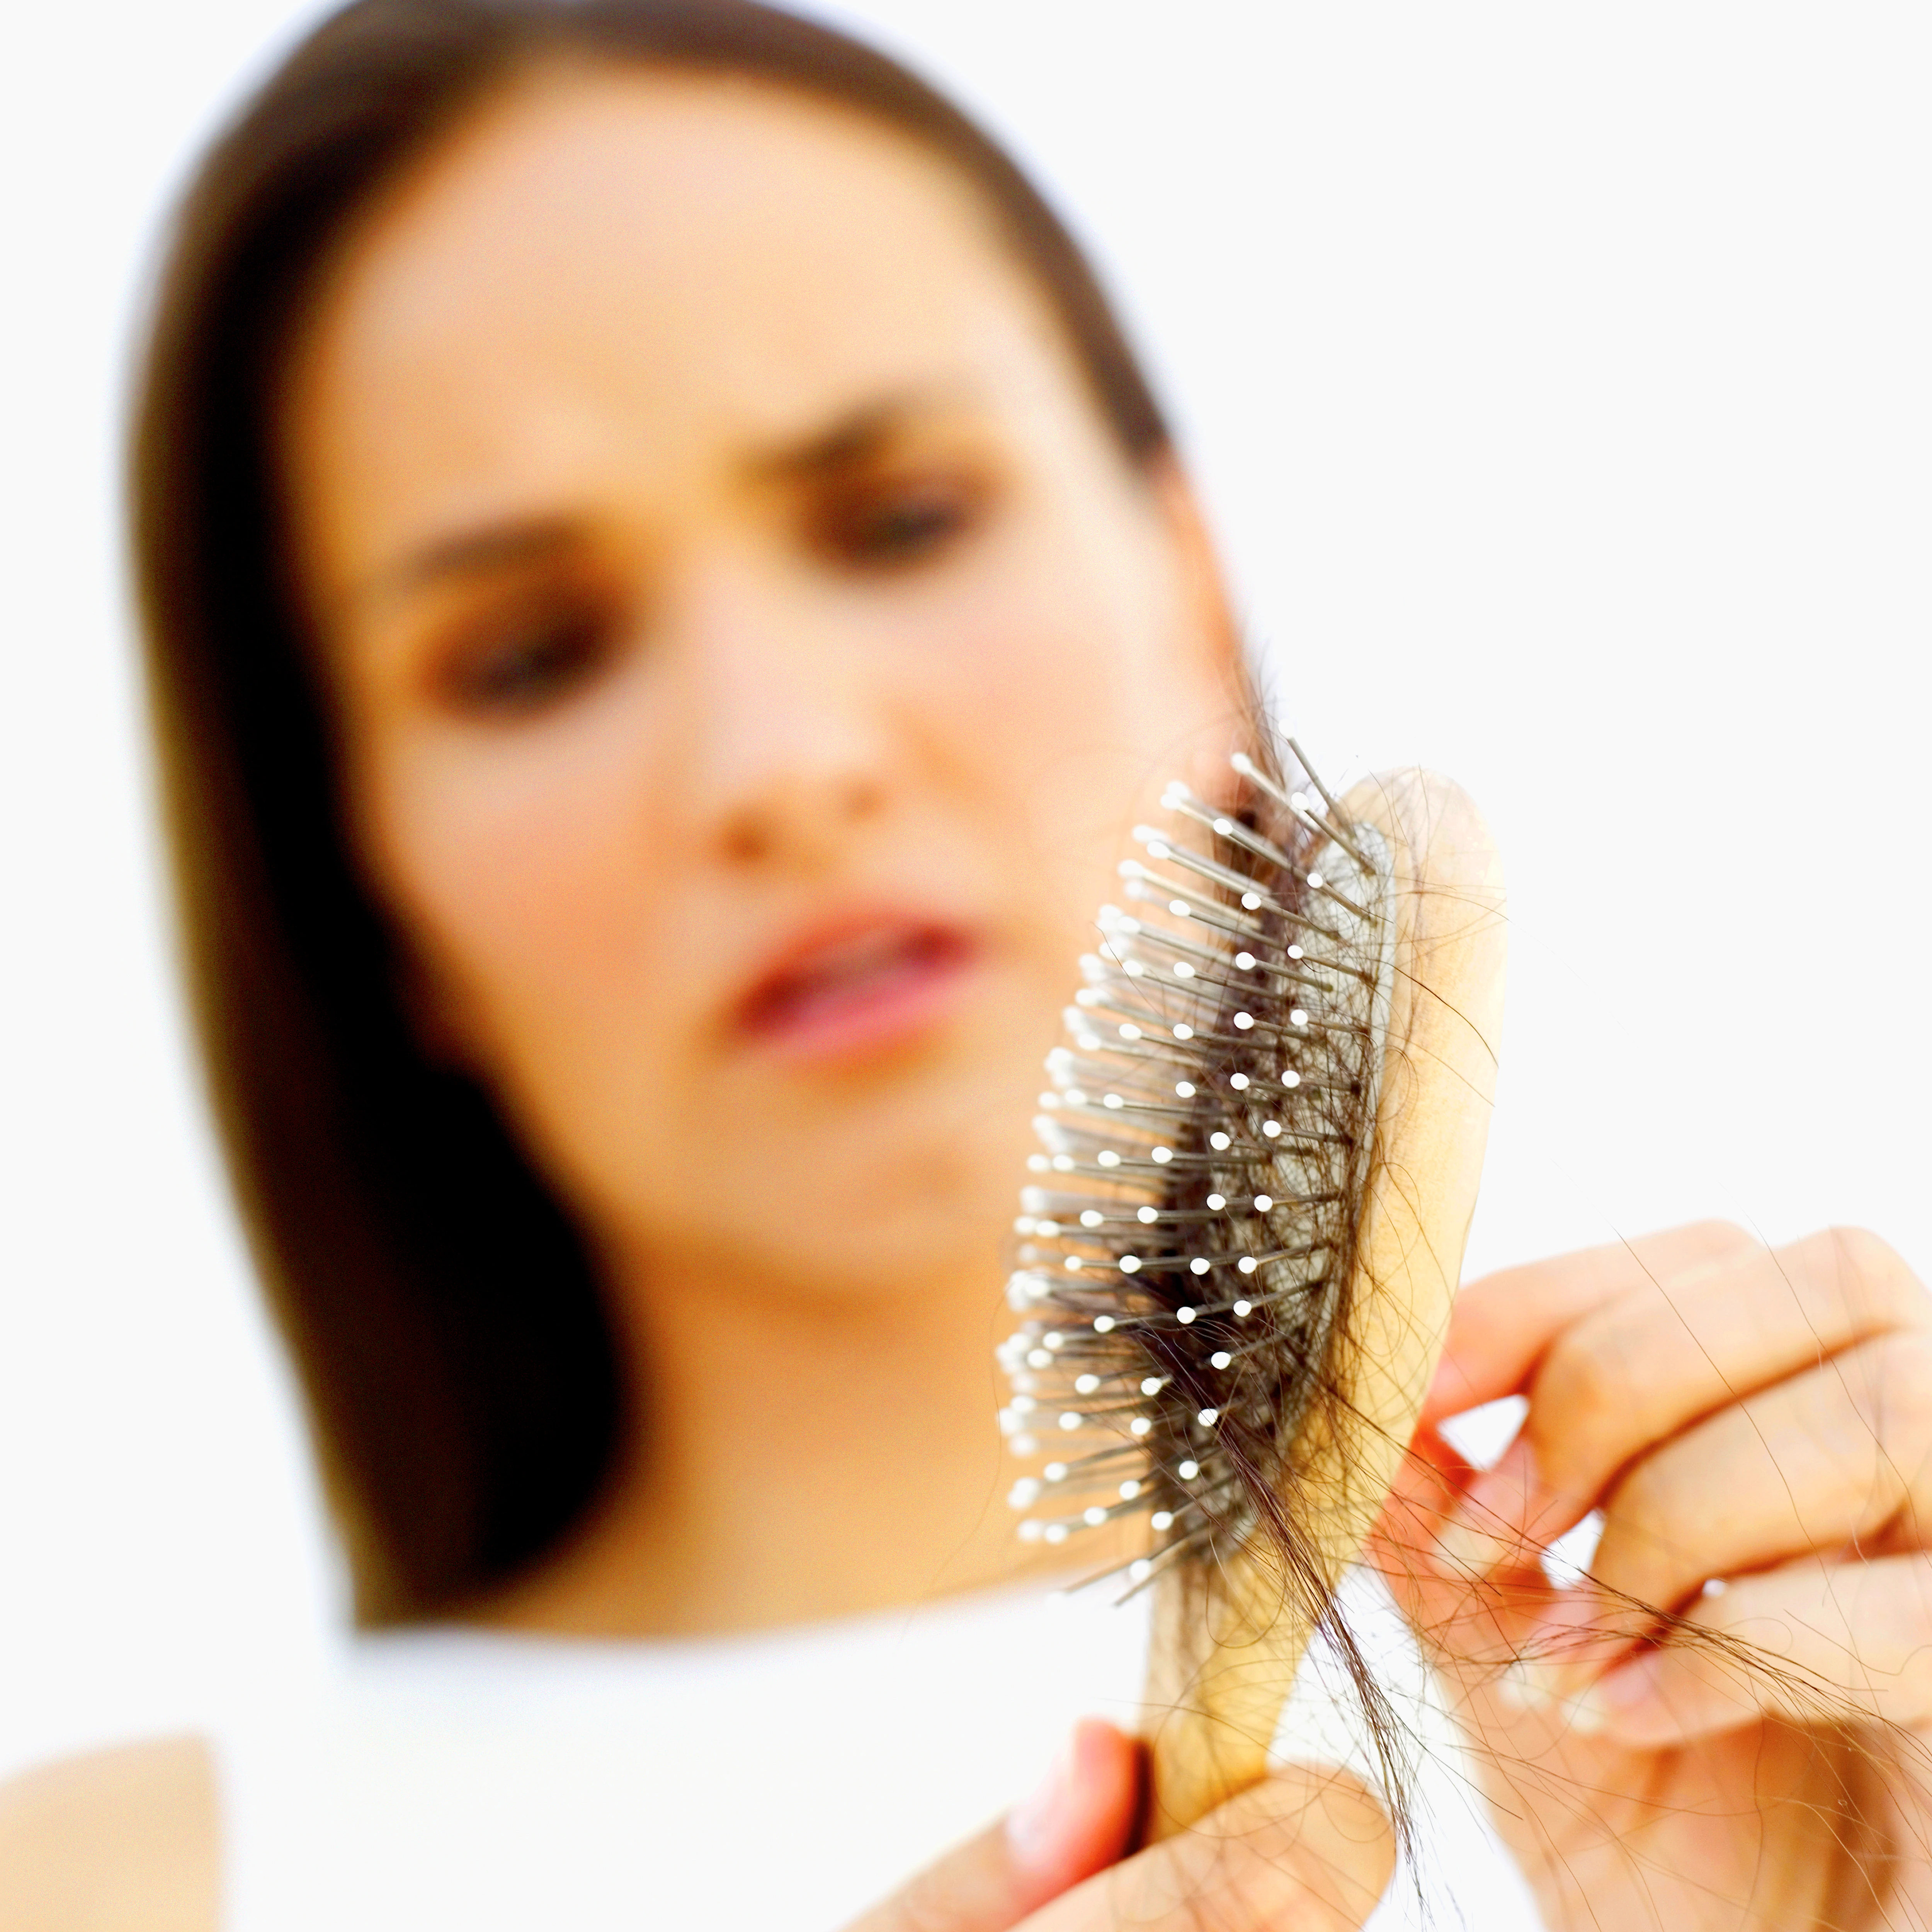 Hair Regrowth Stimulated by Microneedle Patch